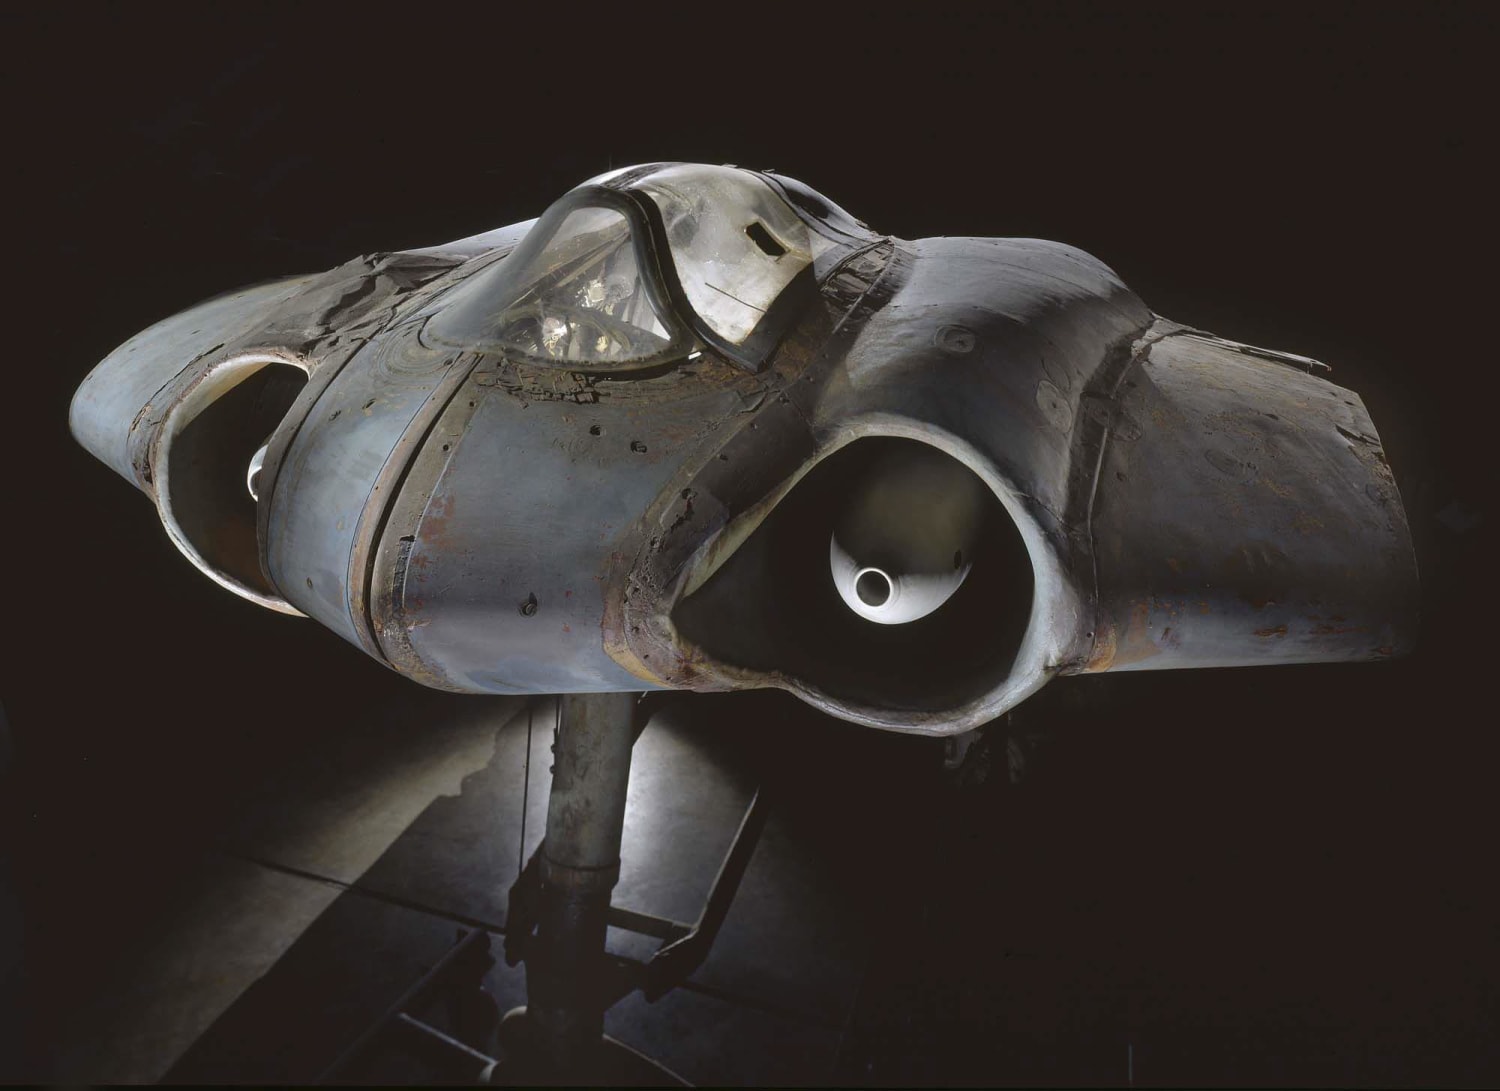 The only surviving Ho 229 - German WW2 aircraft, the first pure flying wing powered by jet engines. 1944